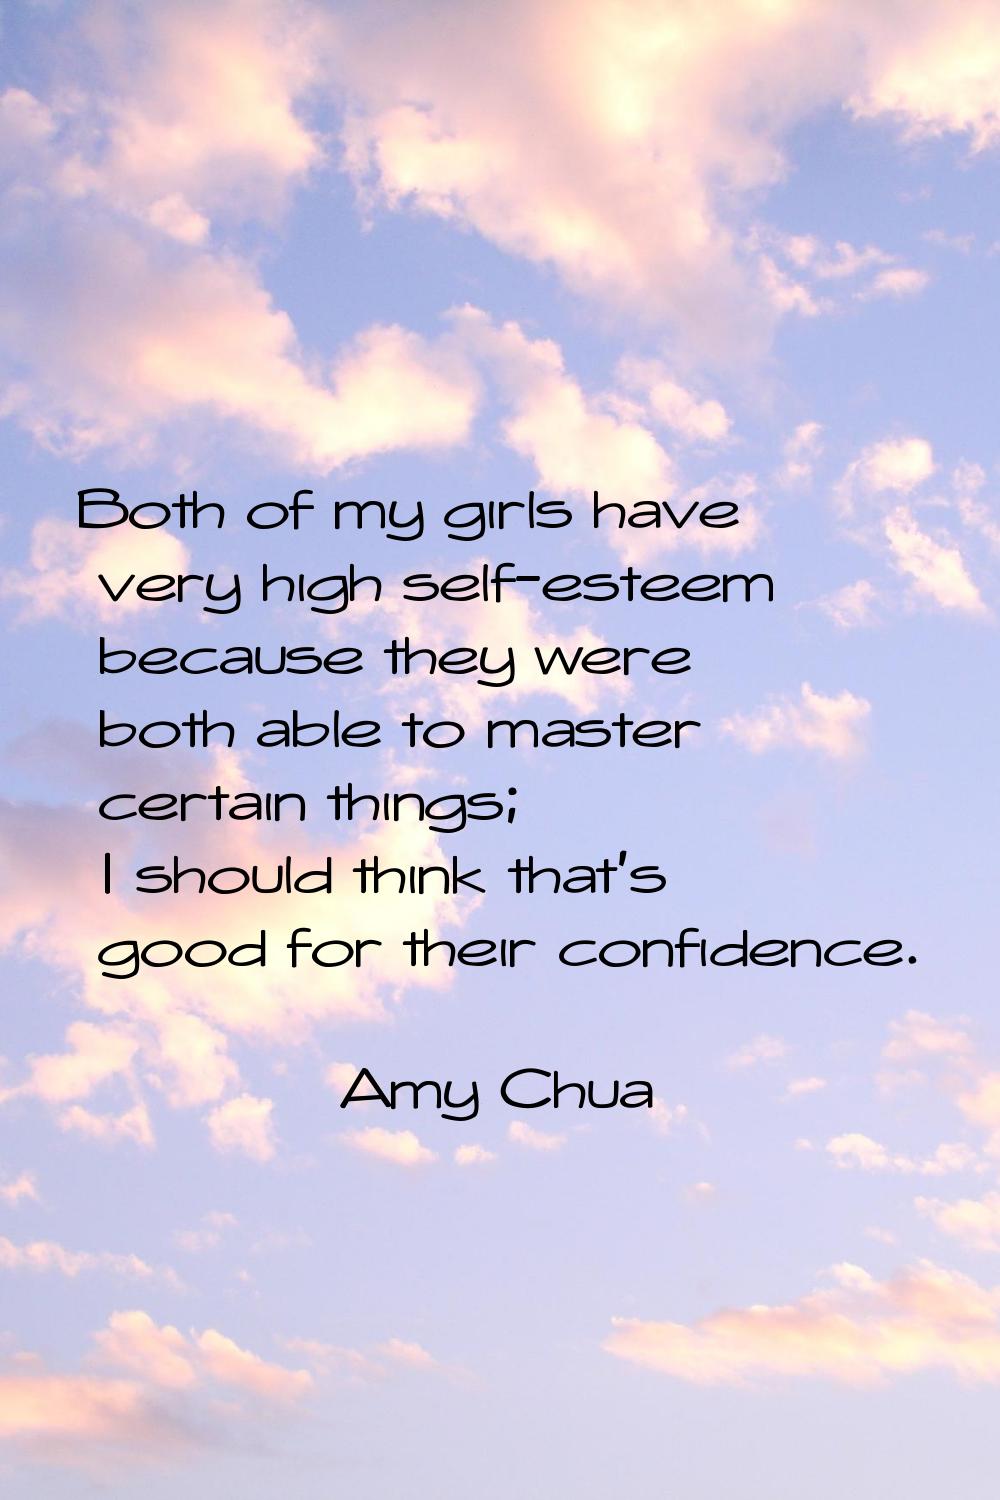 Both of my girls have very high self-esteem because they were both able to master certain things; I